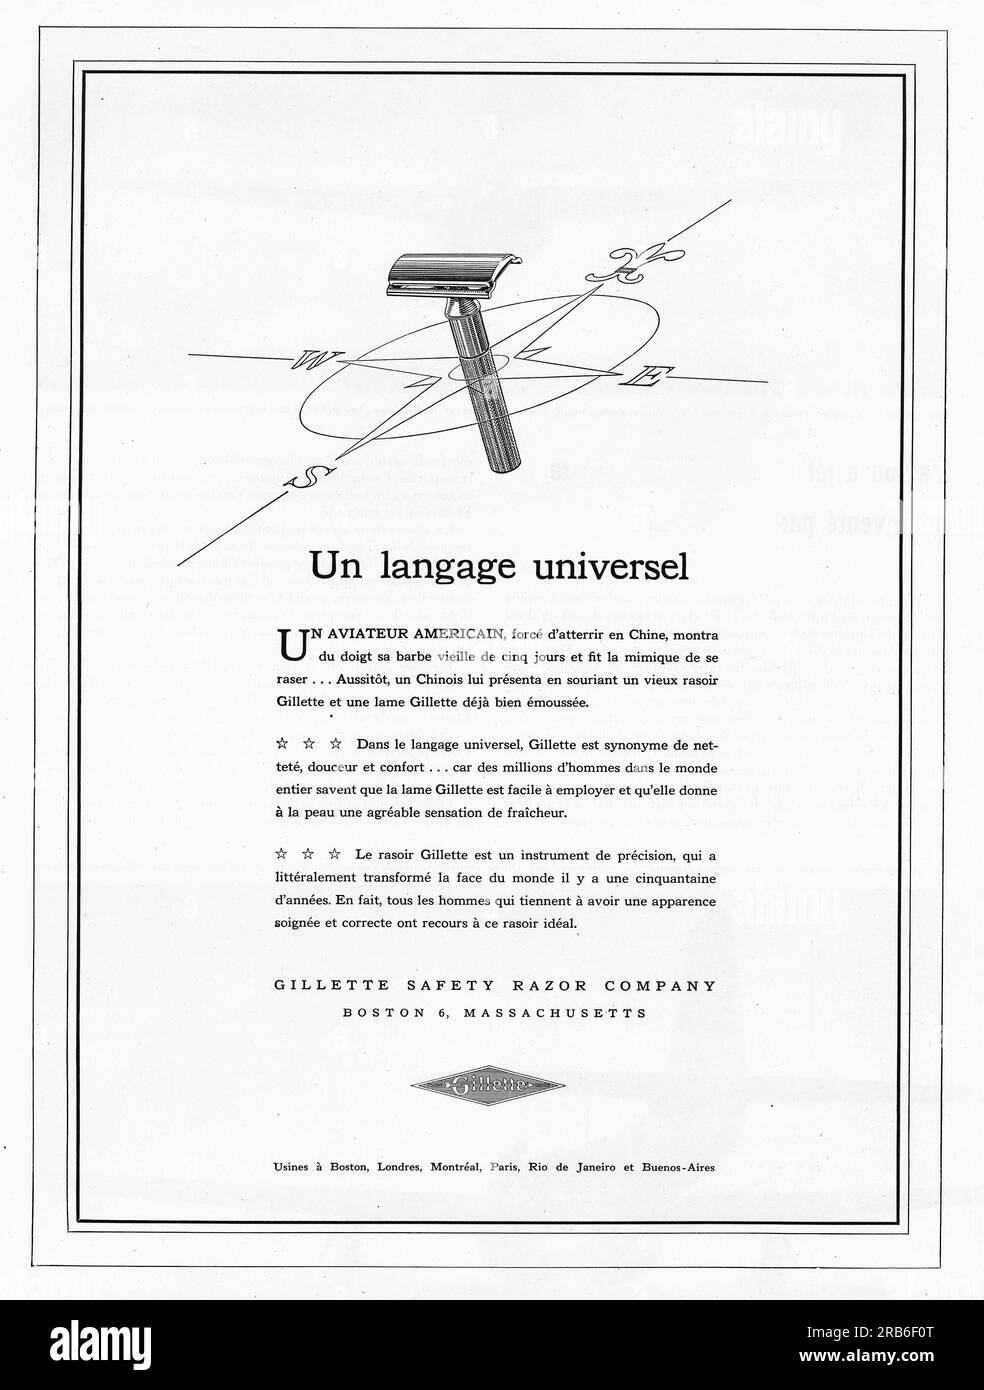 Gillette safety razor company advert in a French magazine 1946 Stock Photo